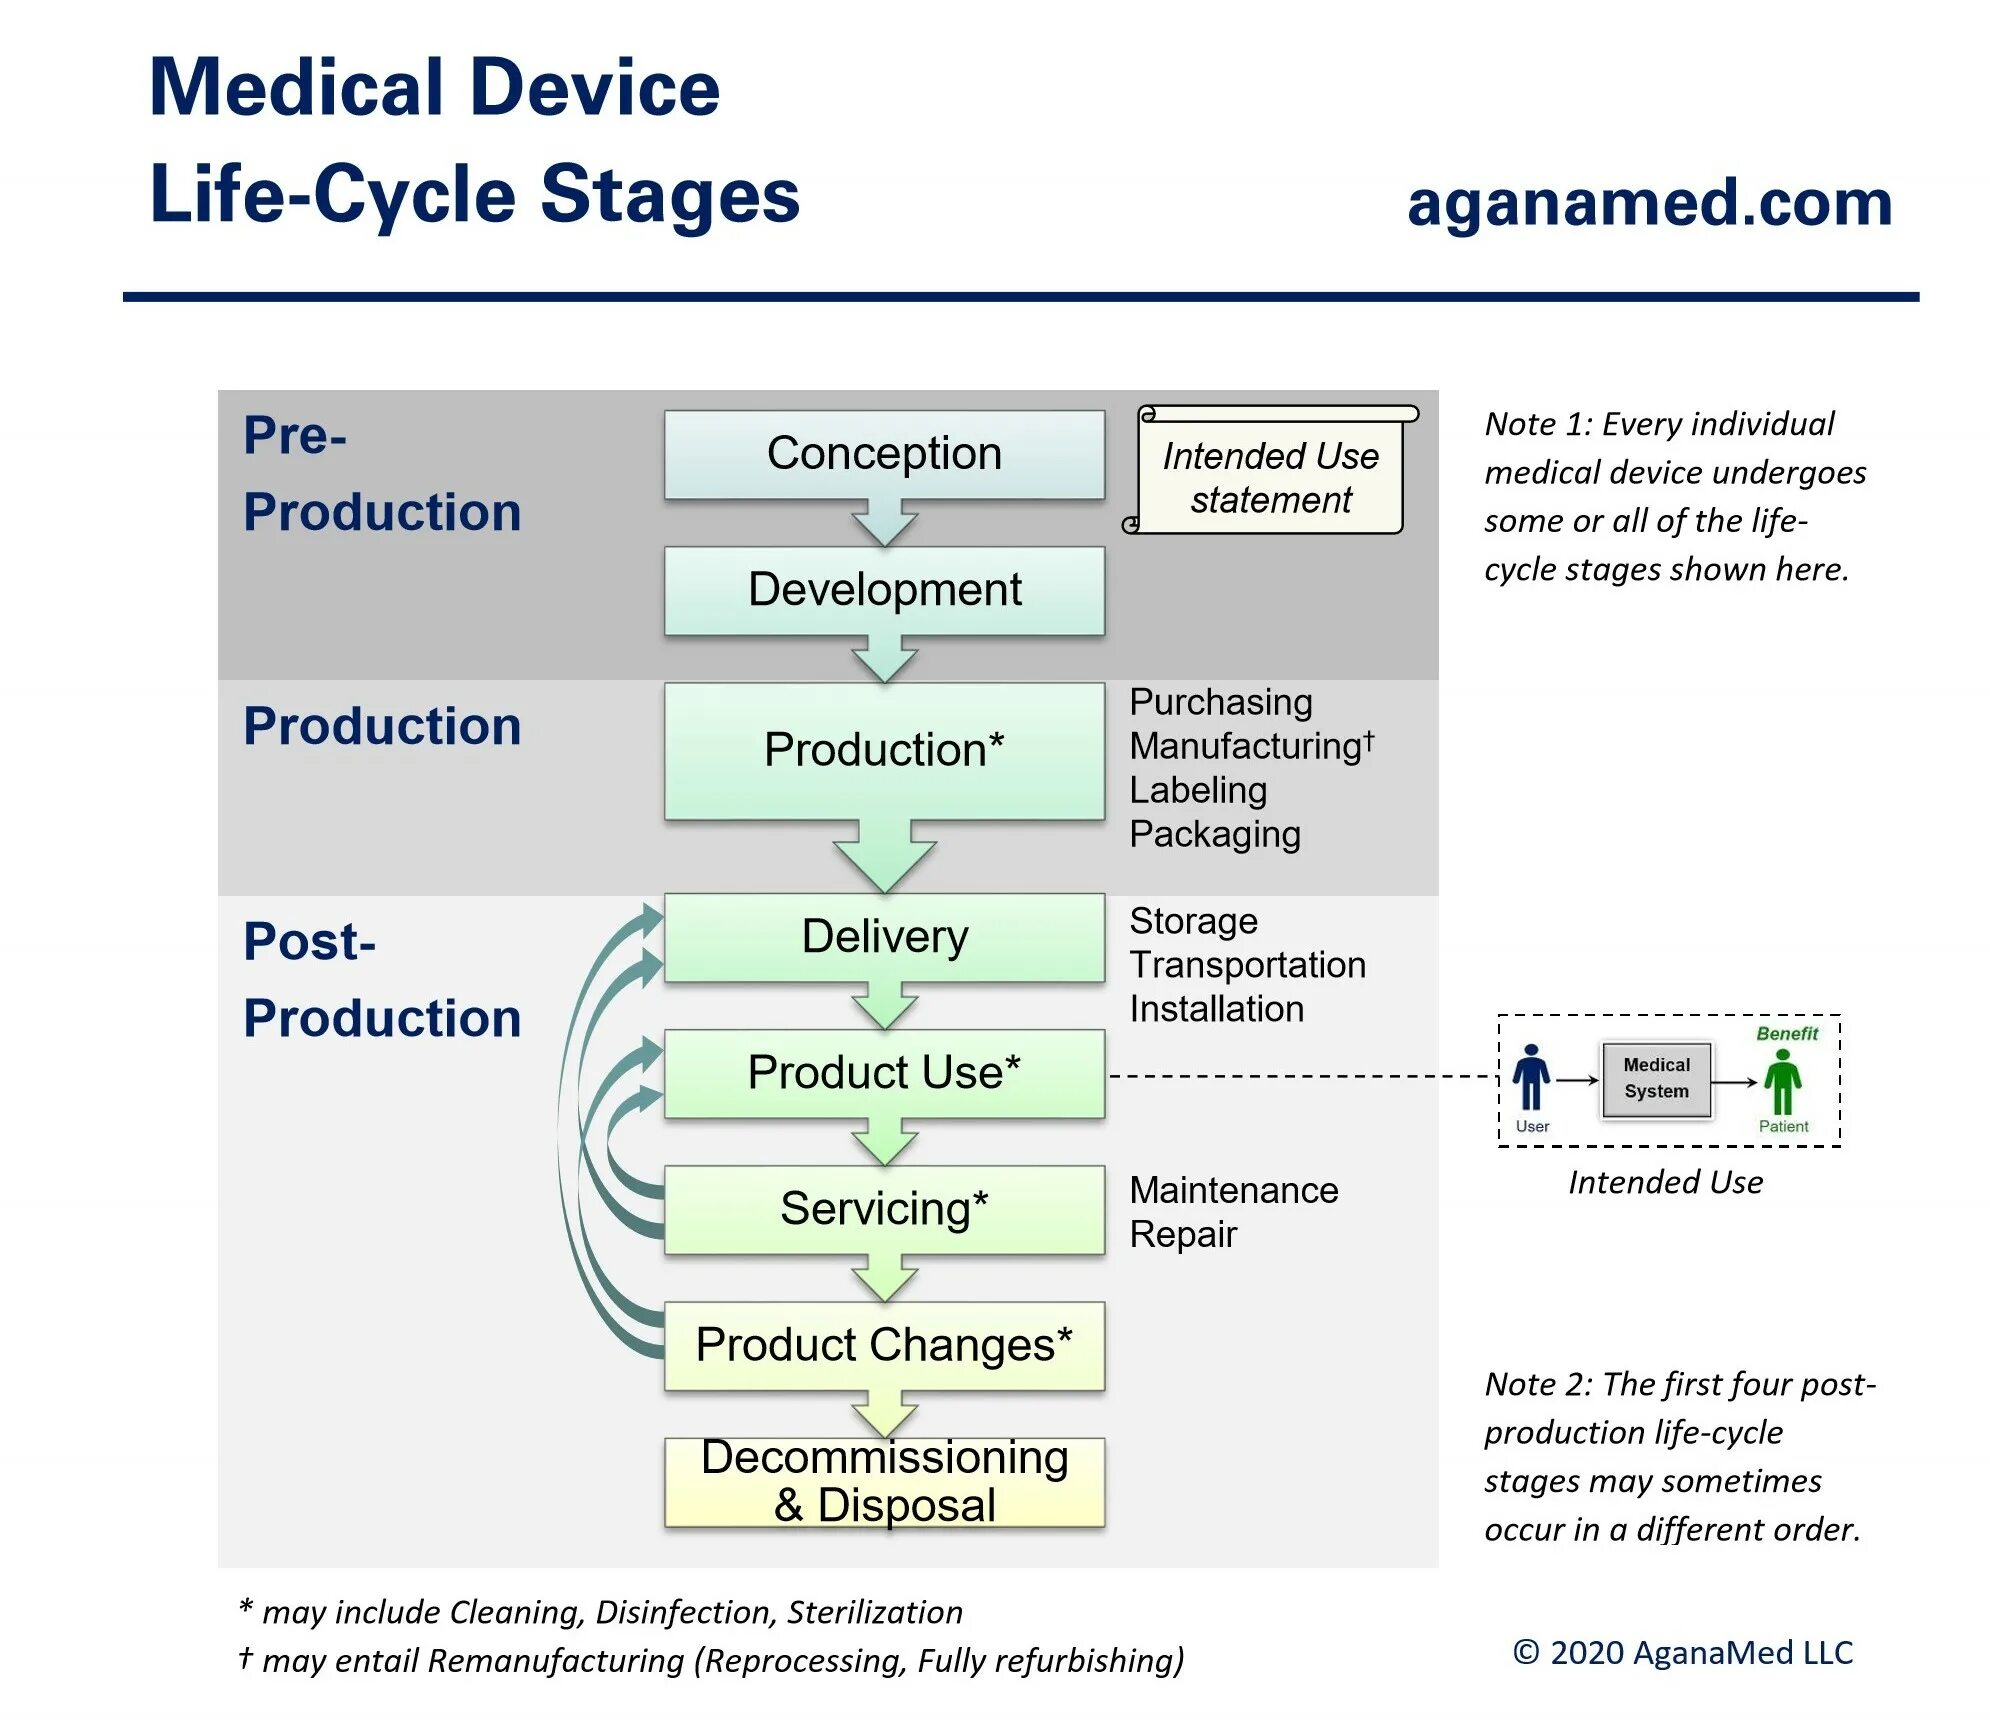 Develop device. Medical device Development. Staging Lifecycle. ЕЭК decision 27 Medical devices. Medical devices in vitro Diagnostic.